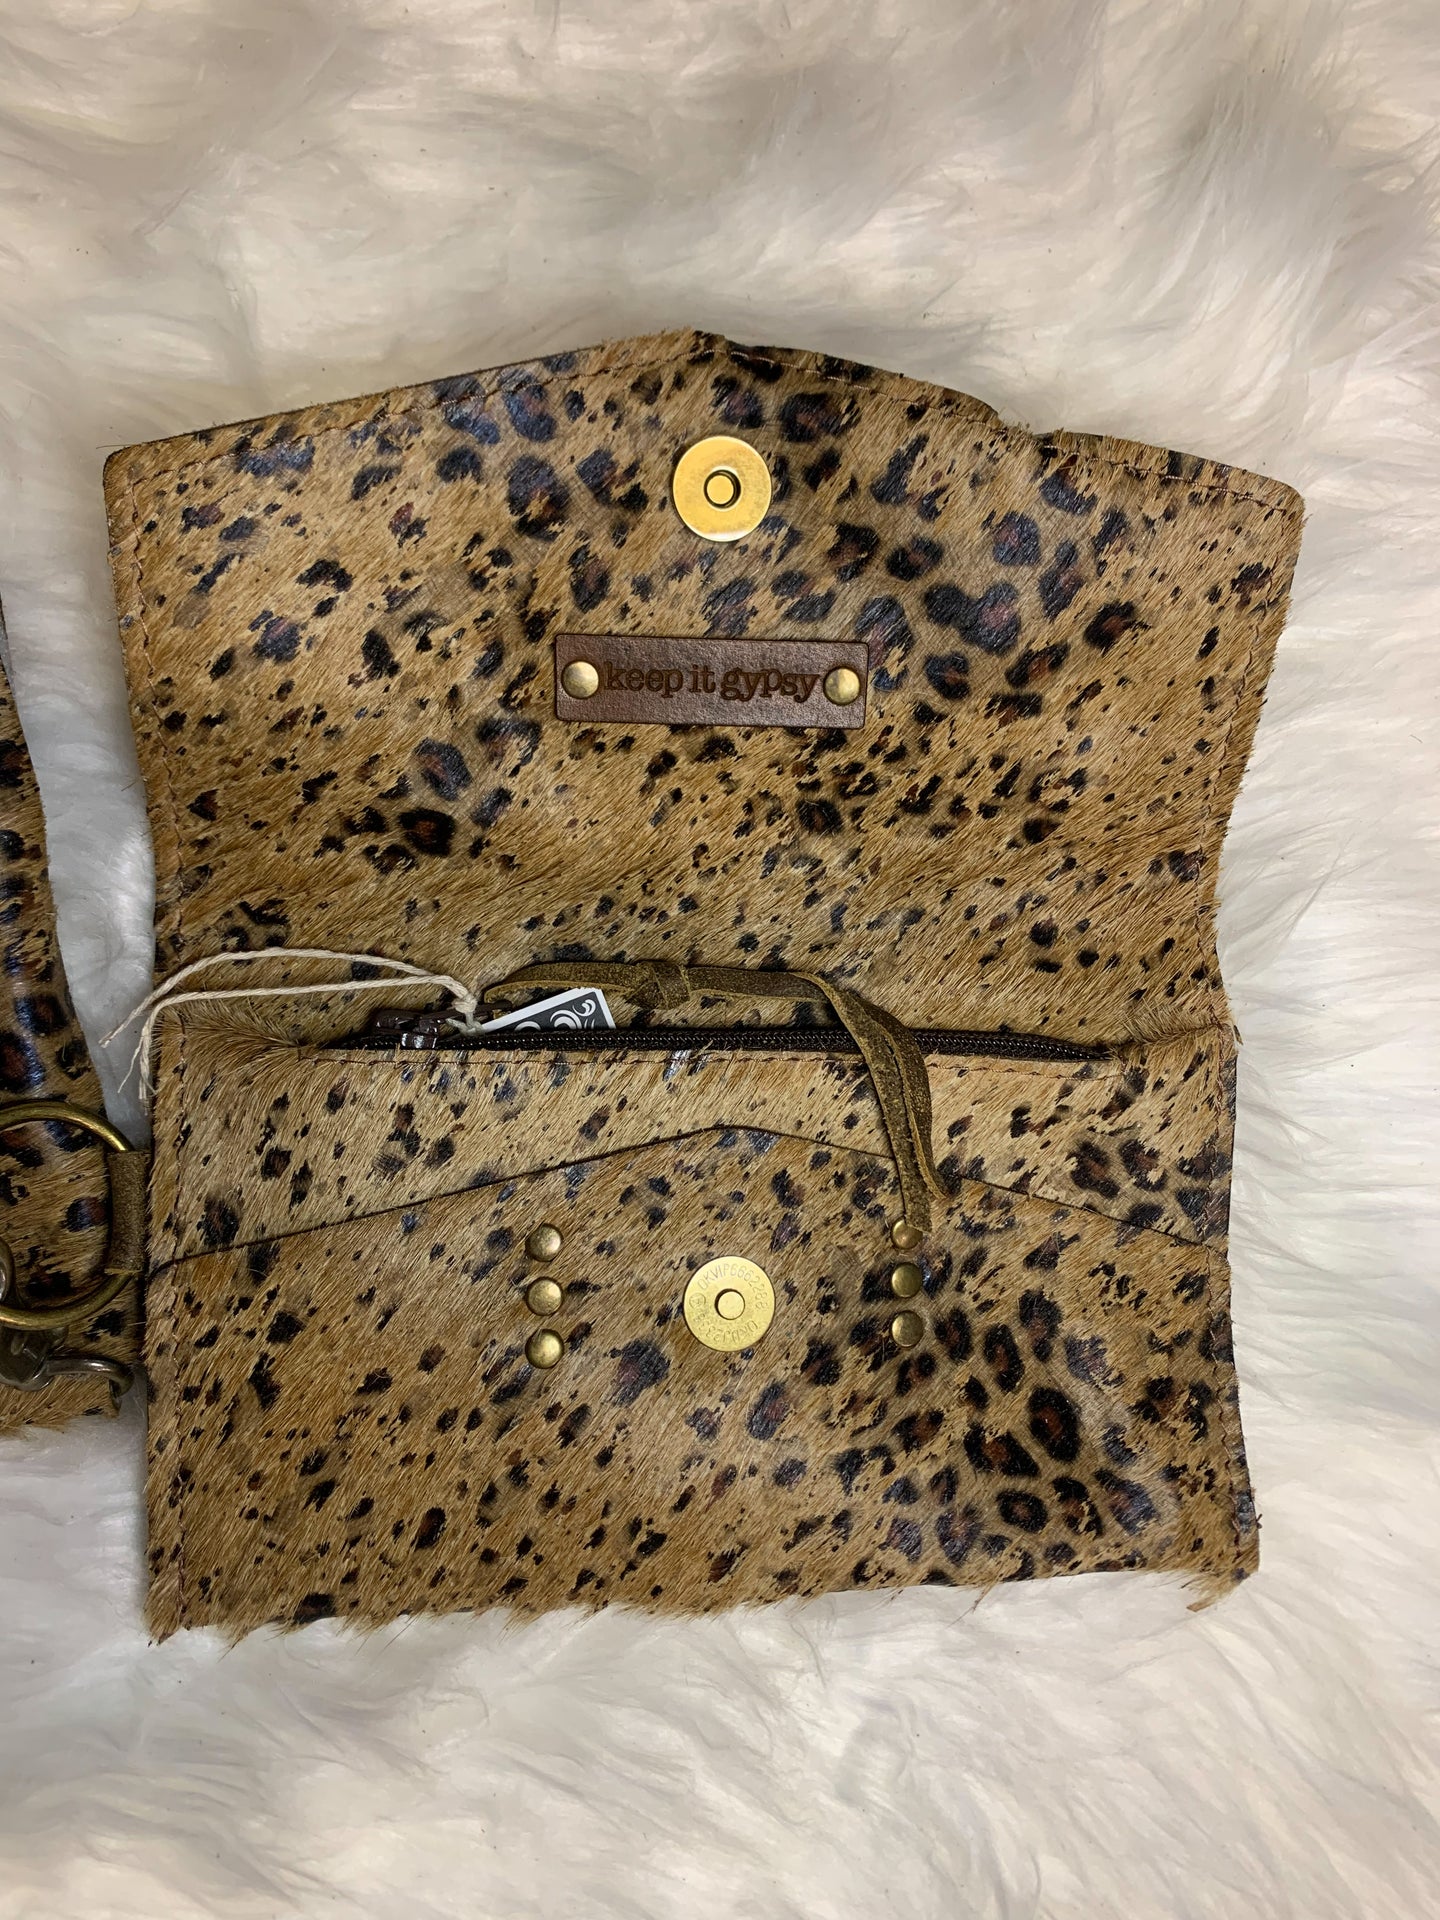 Upcycled LV Monogram with Leopard Envelope Wallet